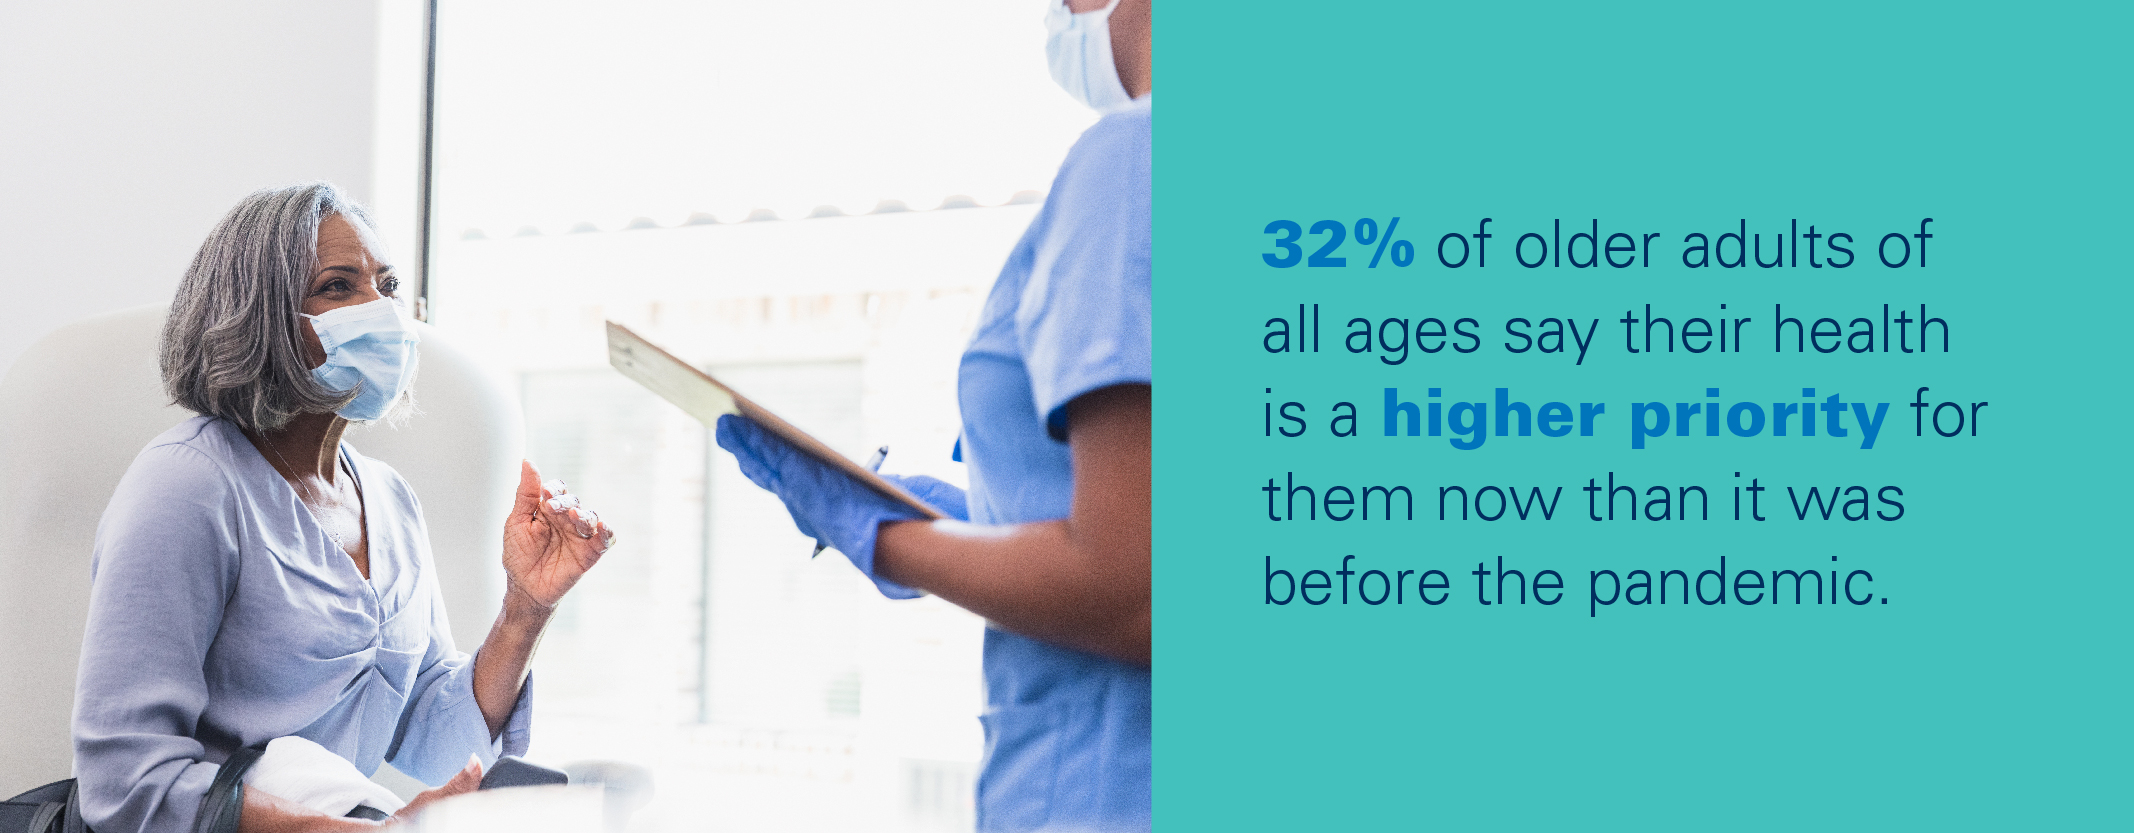 32% of older adults of all ages say their health is a higher priority for them now than before the pandemic